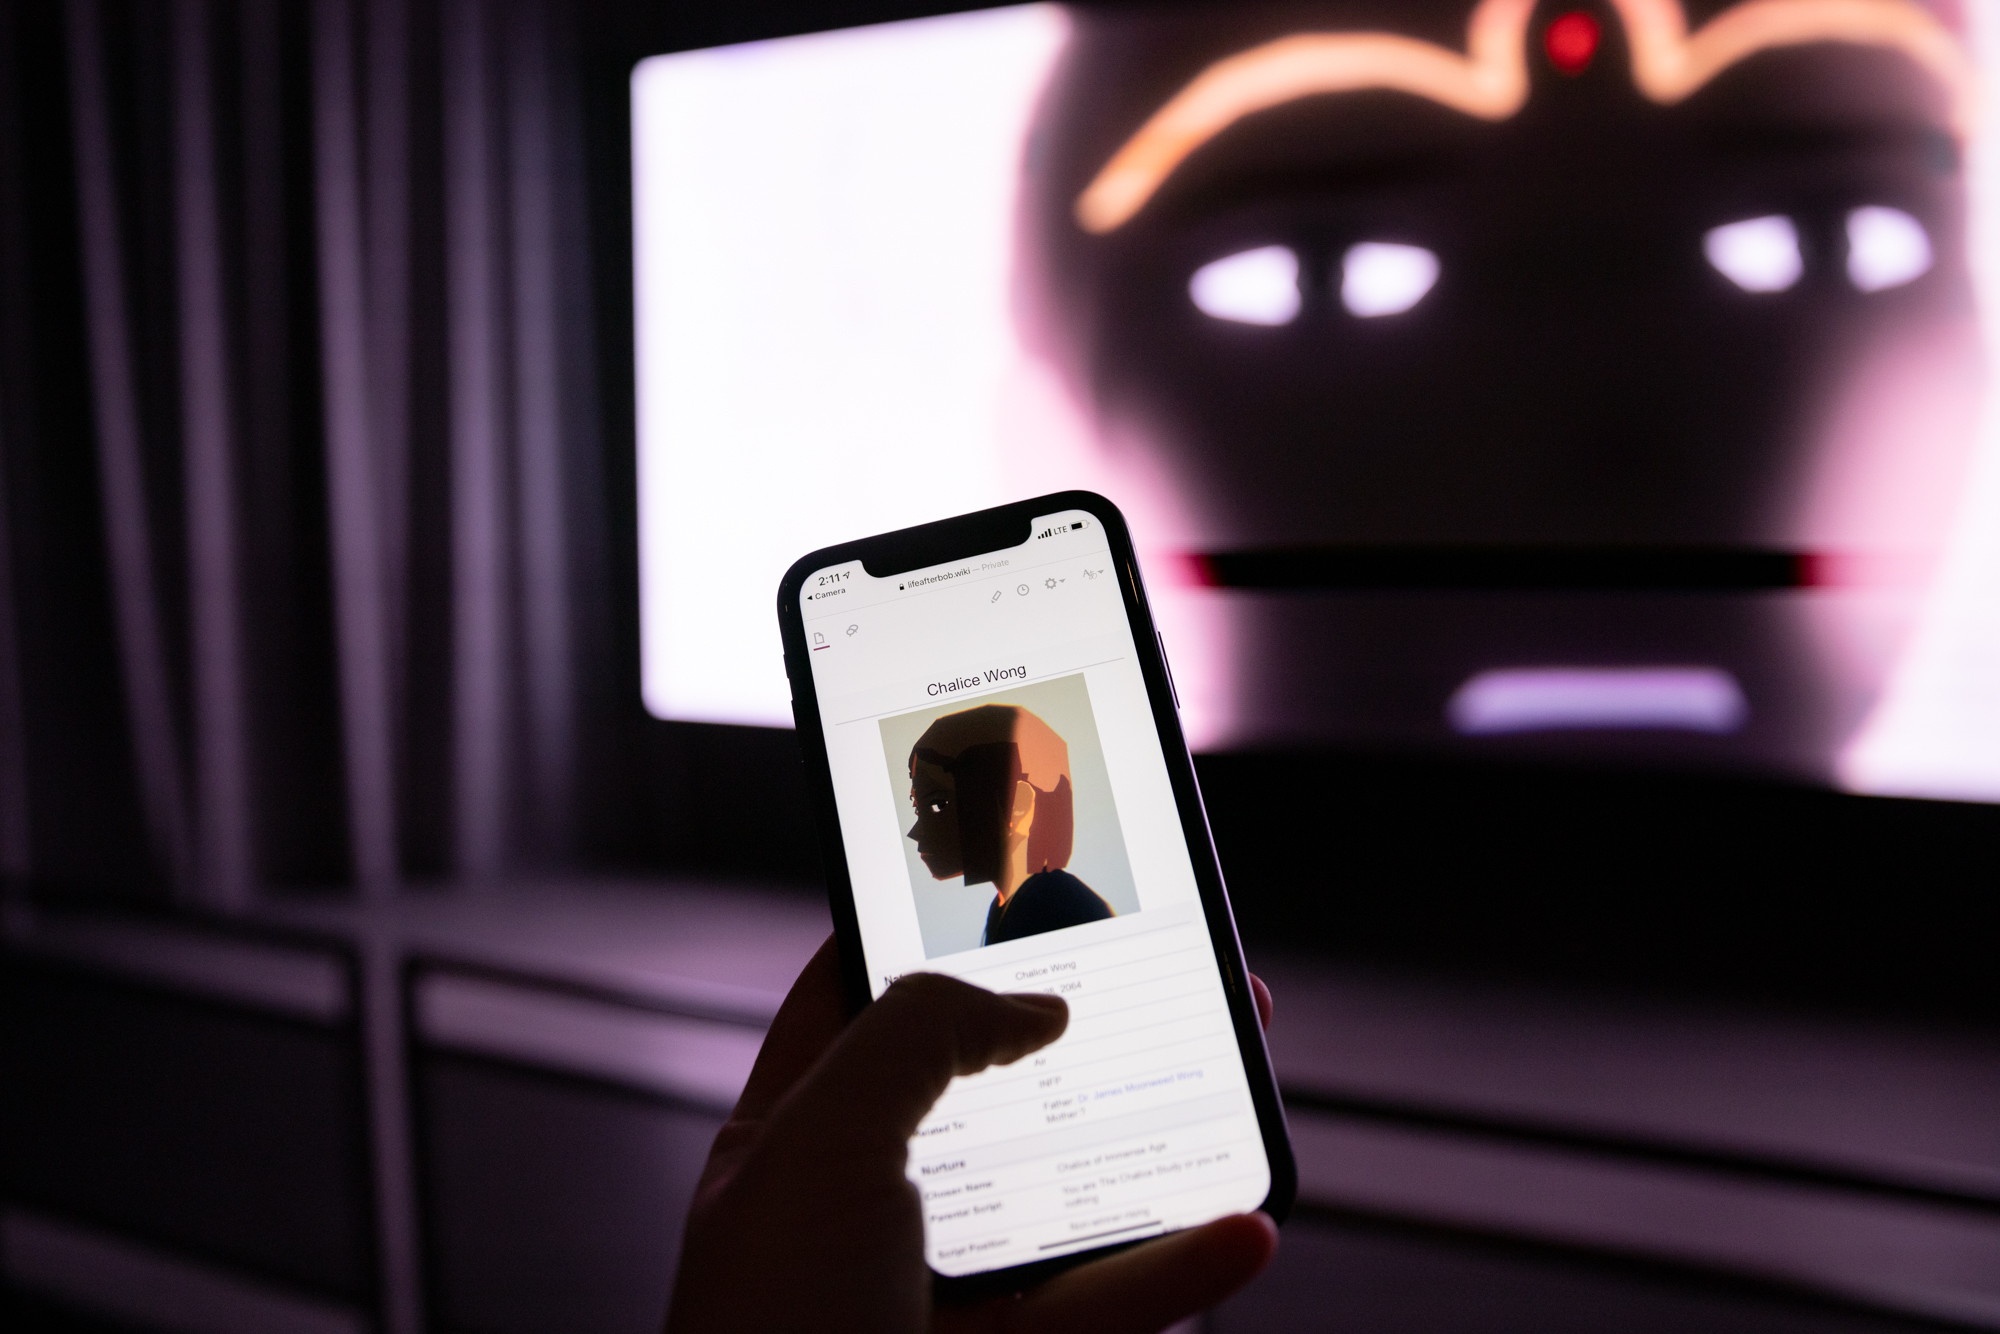 A hand holds a phone screen displaying a wiki page up in front of a movie screen with a close up of a character in an anime film.